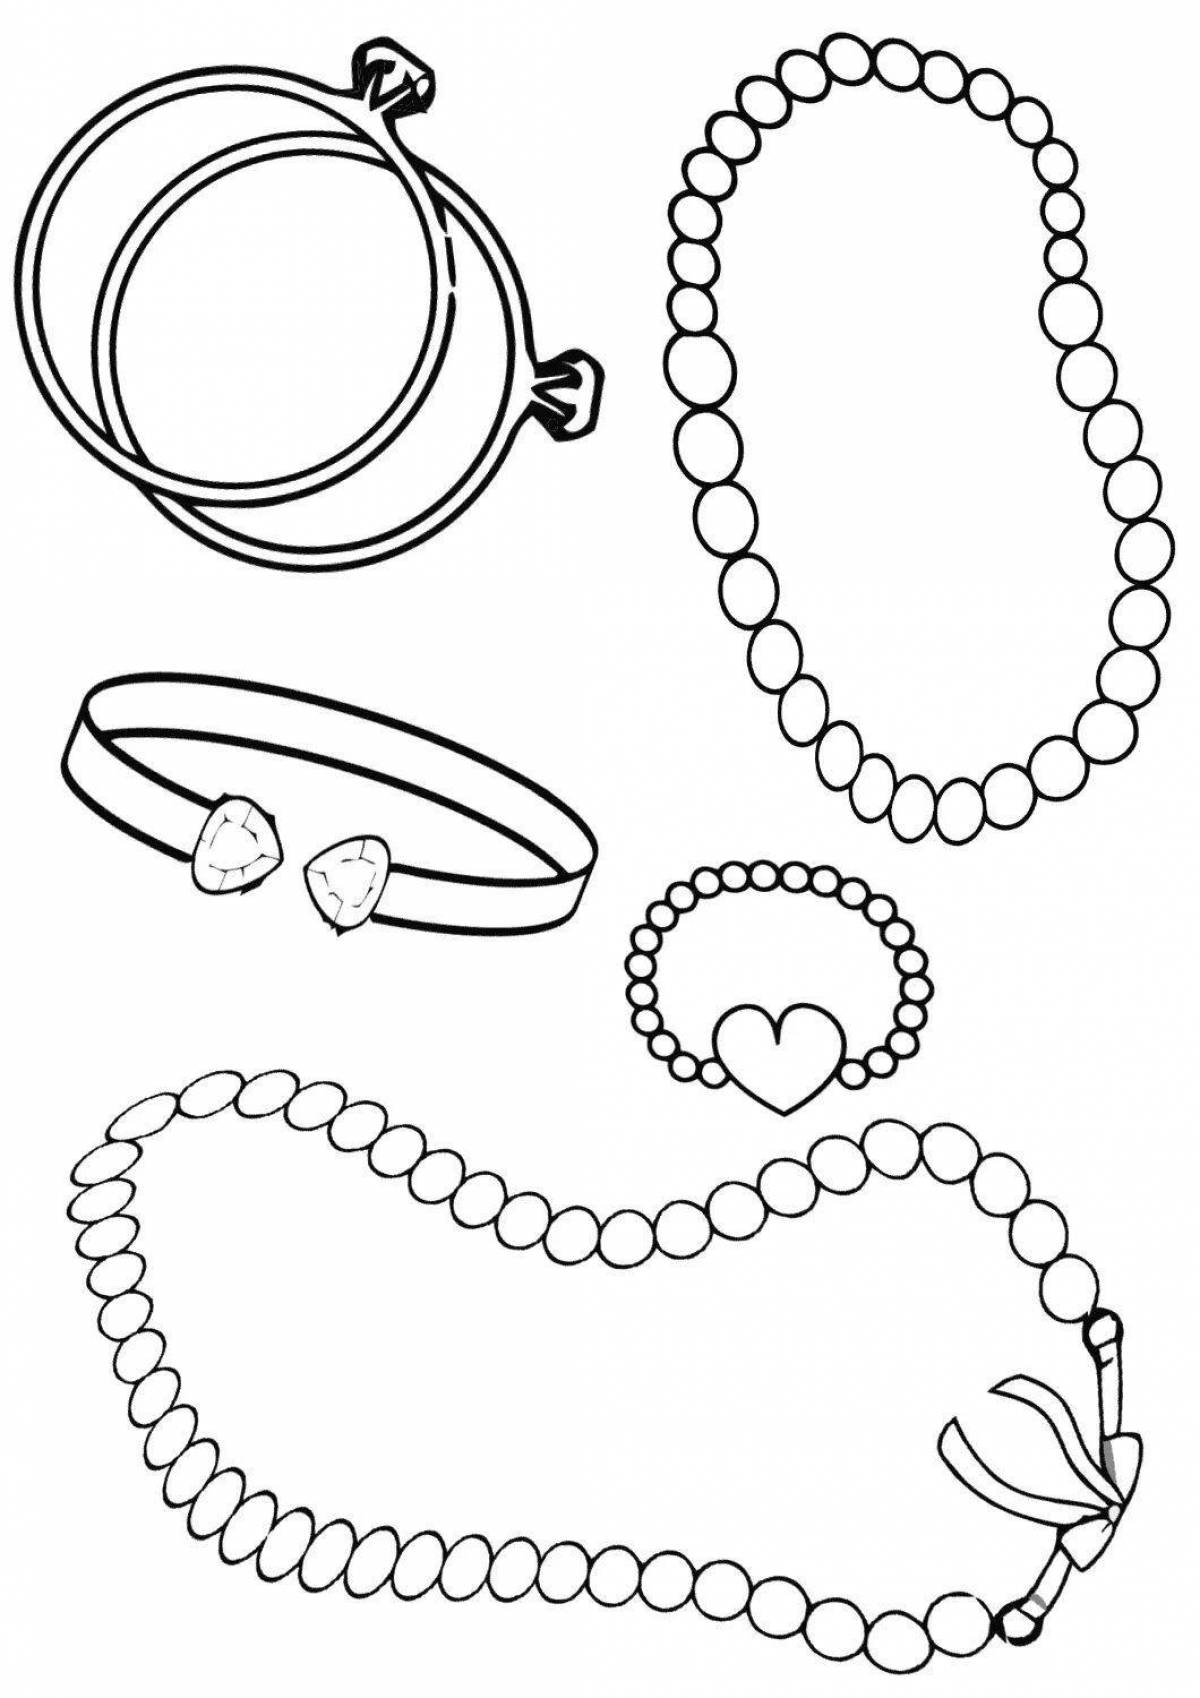 Colored beaded coloring pages for kids to have fun